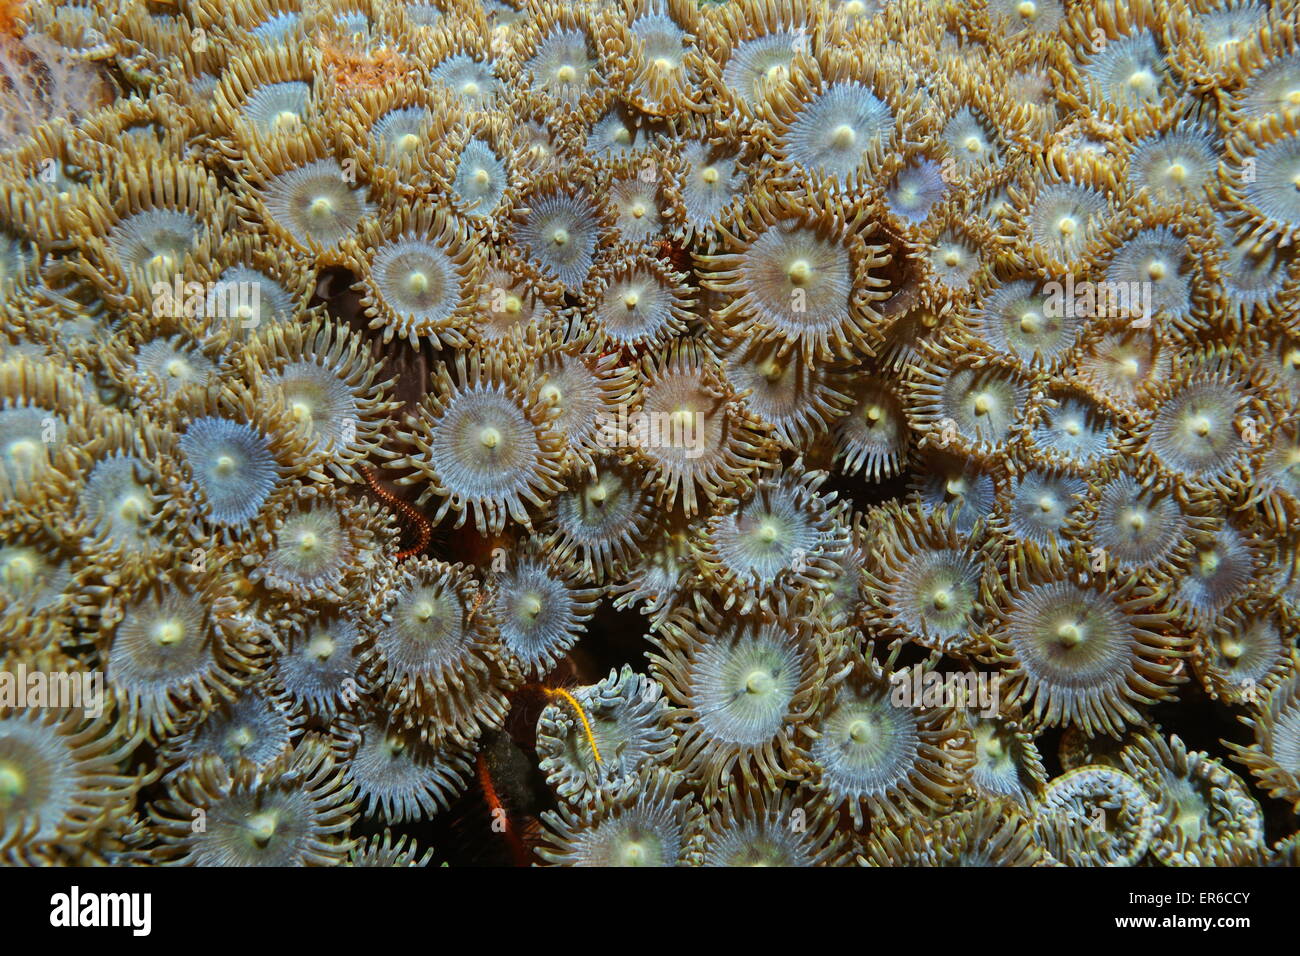 Underwater life, close up image of a colony of Mat zoanthid, Zoanthus pulchellus, Caribbean sea Stock Photo